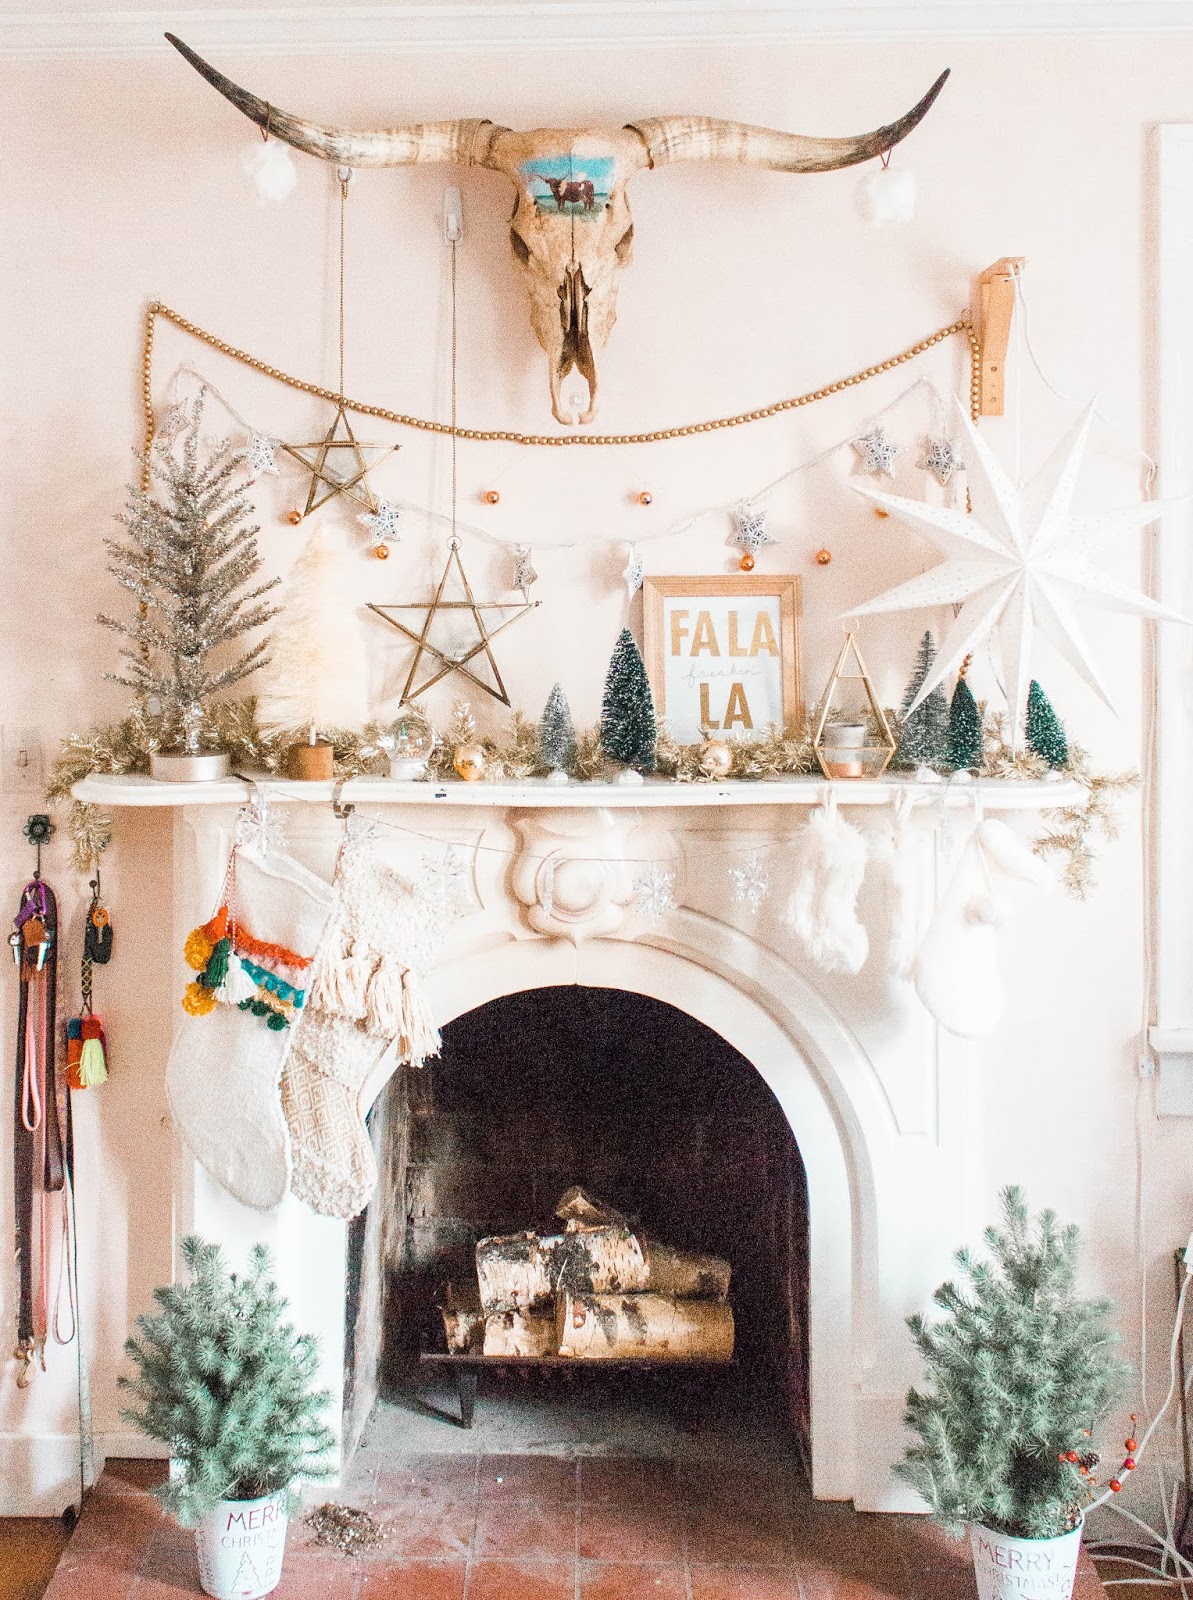 5 Boho Christmas Decorations You Need Year After Year